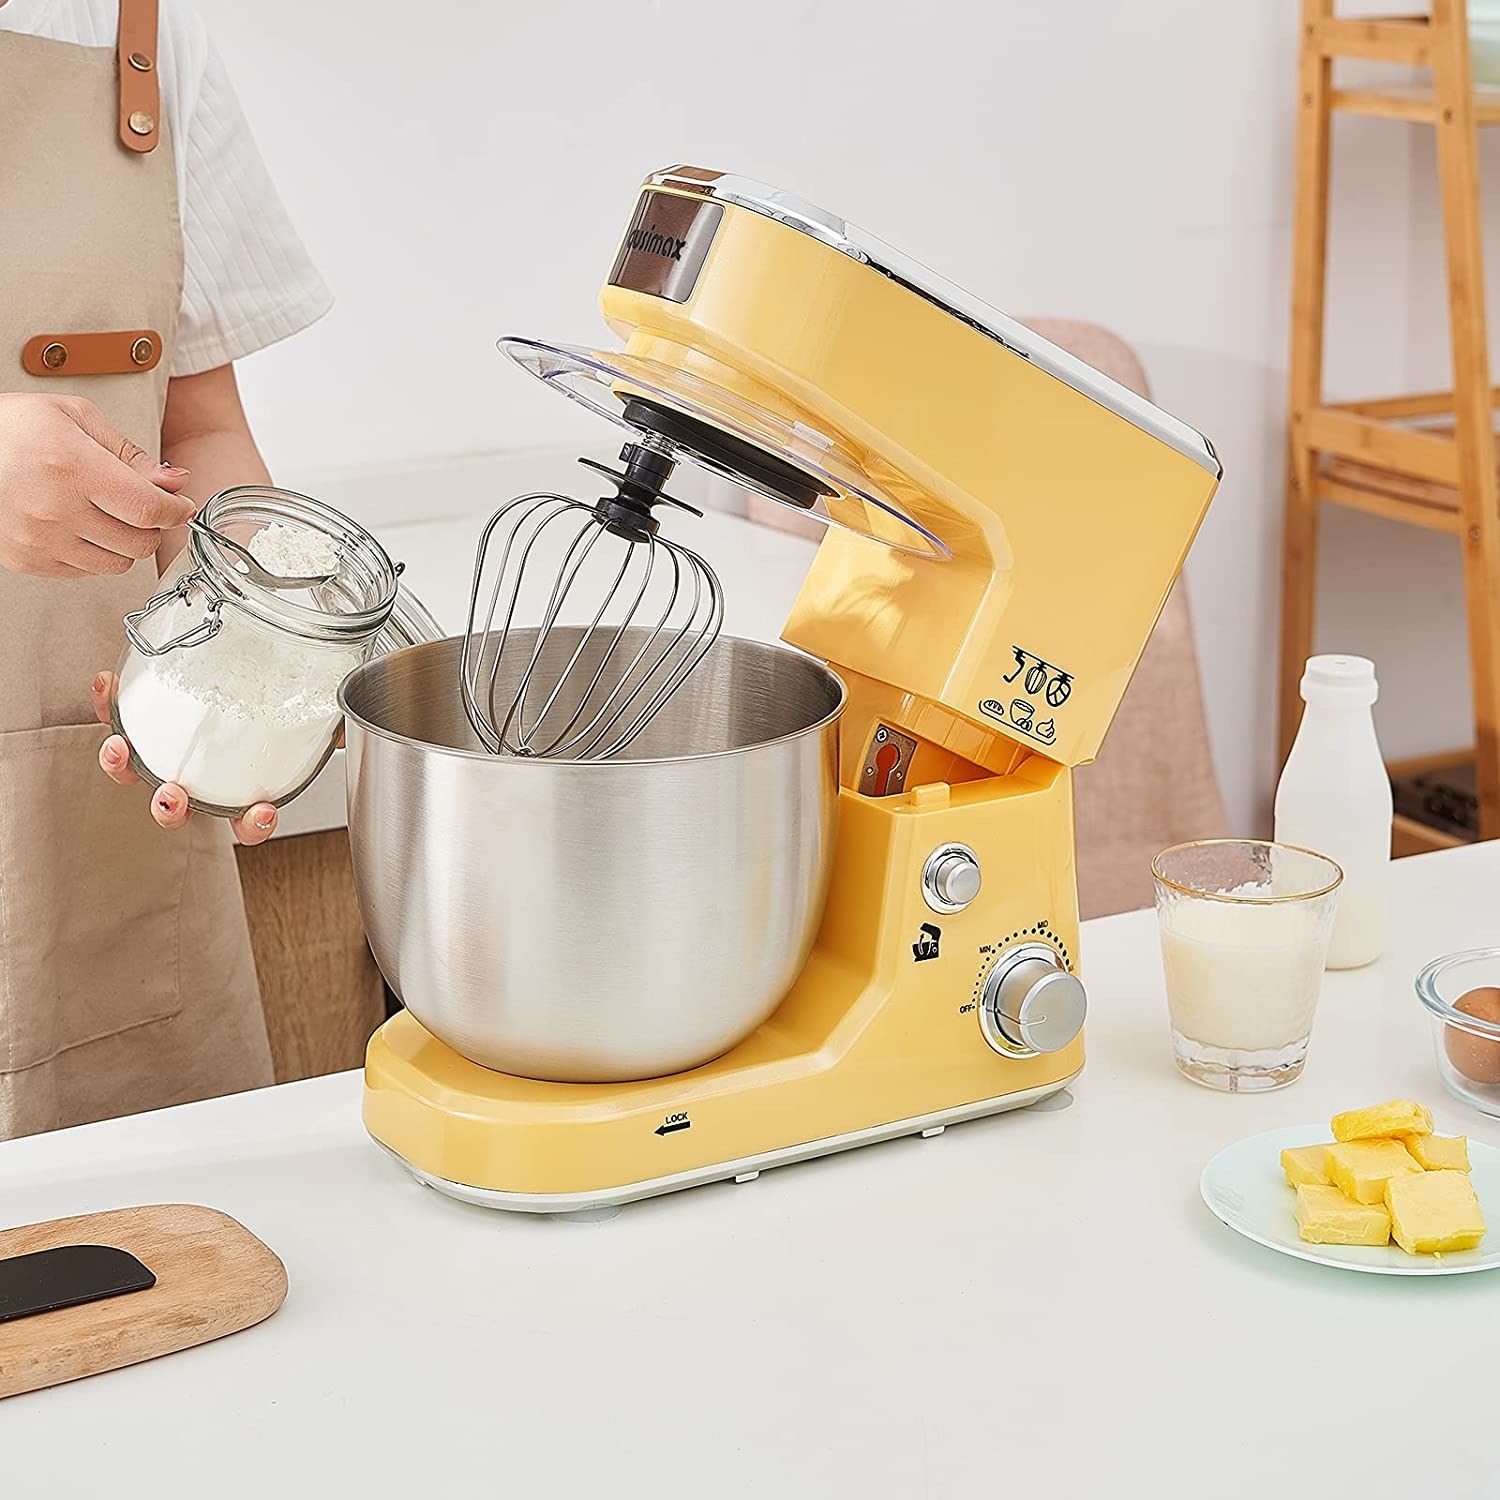 a yellow stand mixer